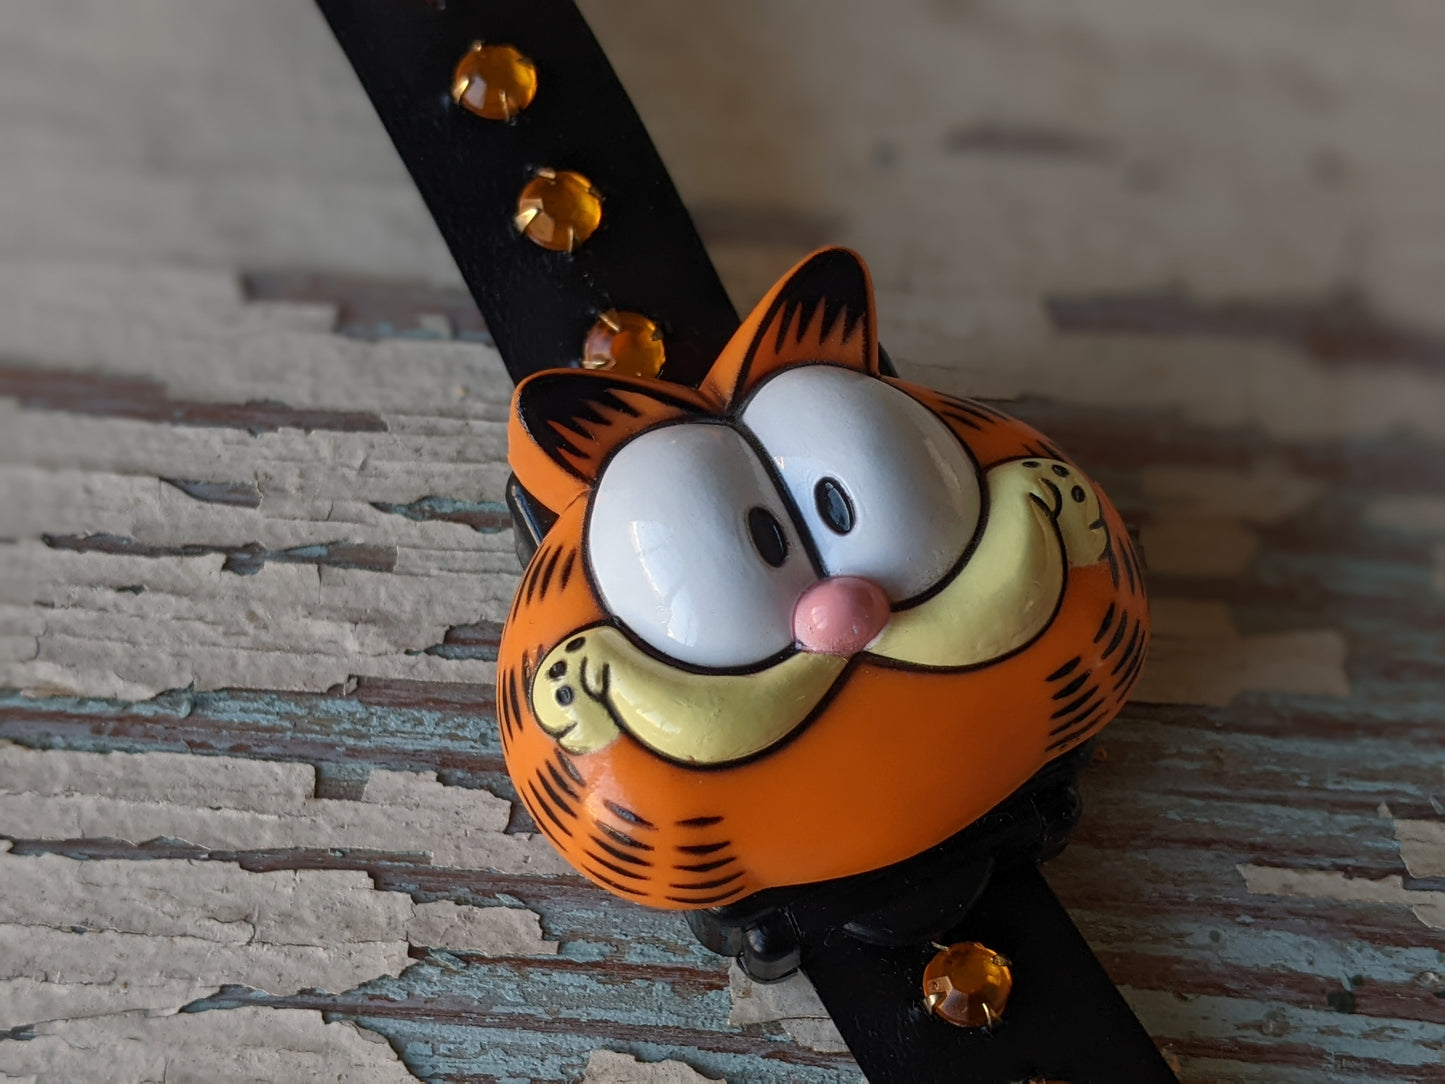 1978 Garfield !! NOS !! Flip-It LCD Quartz Watch w New Battery Installed !! Amazing Retro Gifts & Collectibles